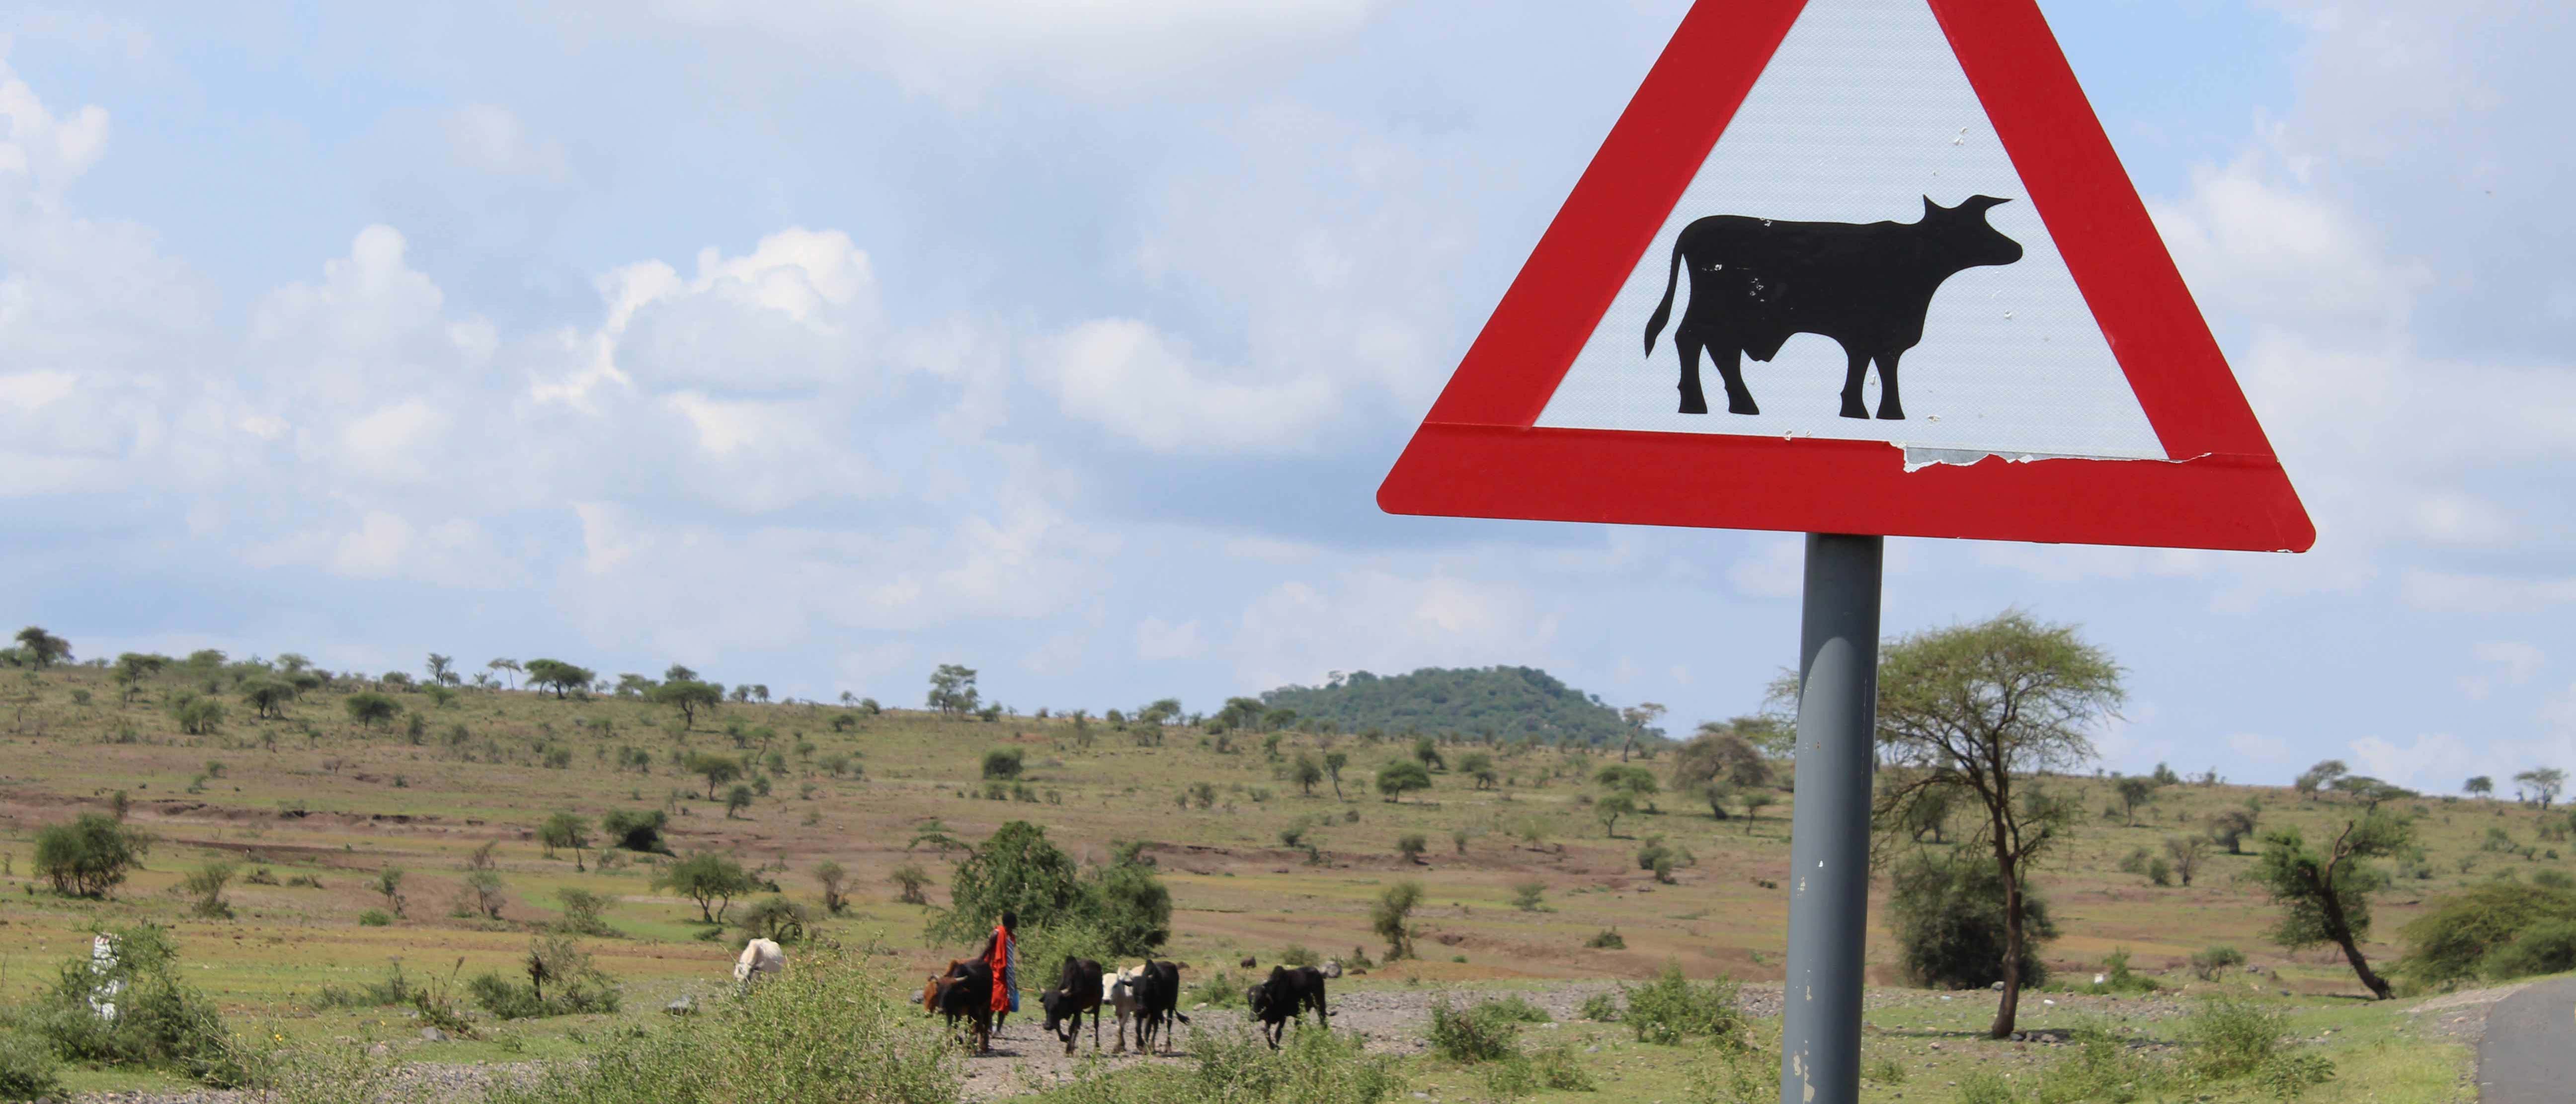 Cattle being herded behind a road sign cautioning the presence of cattle